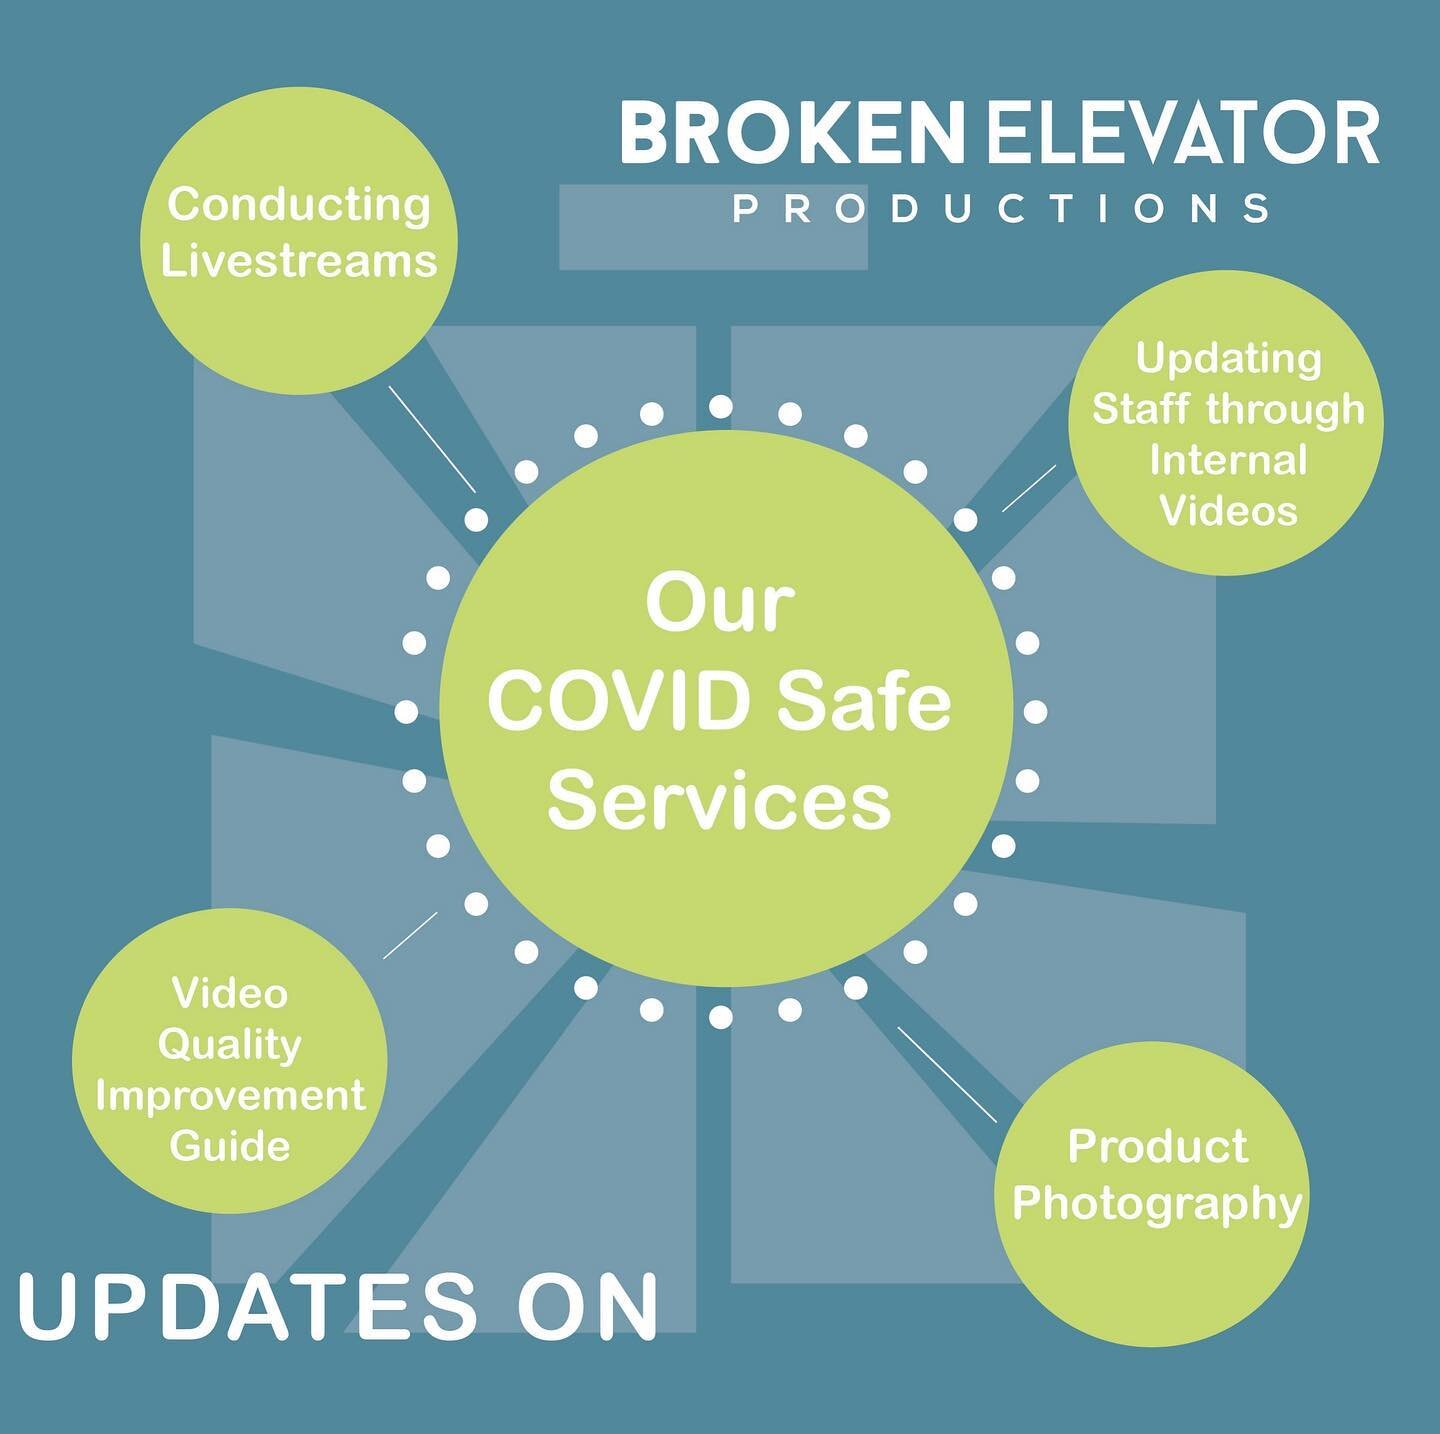 With 2020 behind us. We are reviewing our COVID safe services including: 

- video quality improvement guide
- conducting livestreams
- updating staff through internal videos 
- product photography 

Whether it&rsquo;s a step-by-step tutorial or a hi